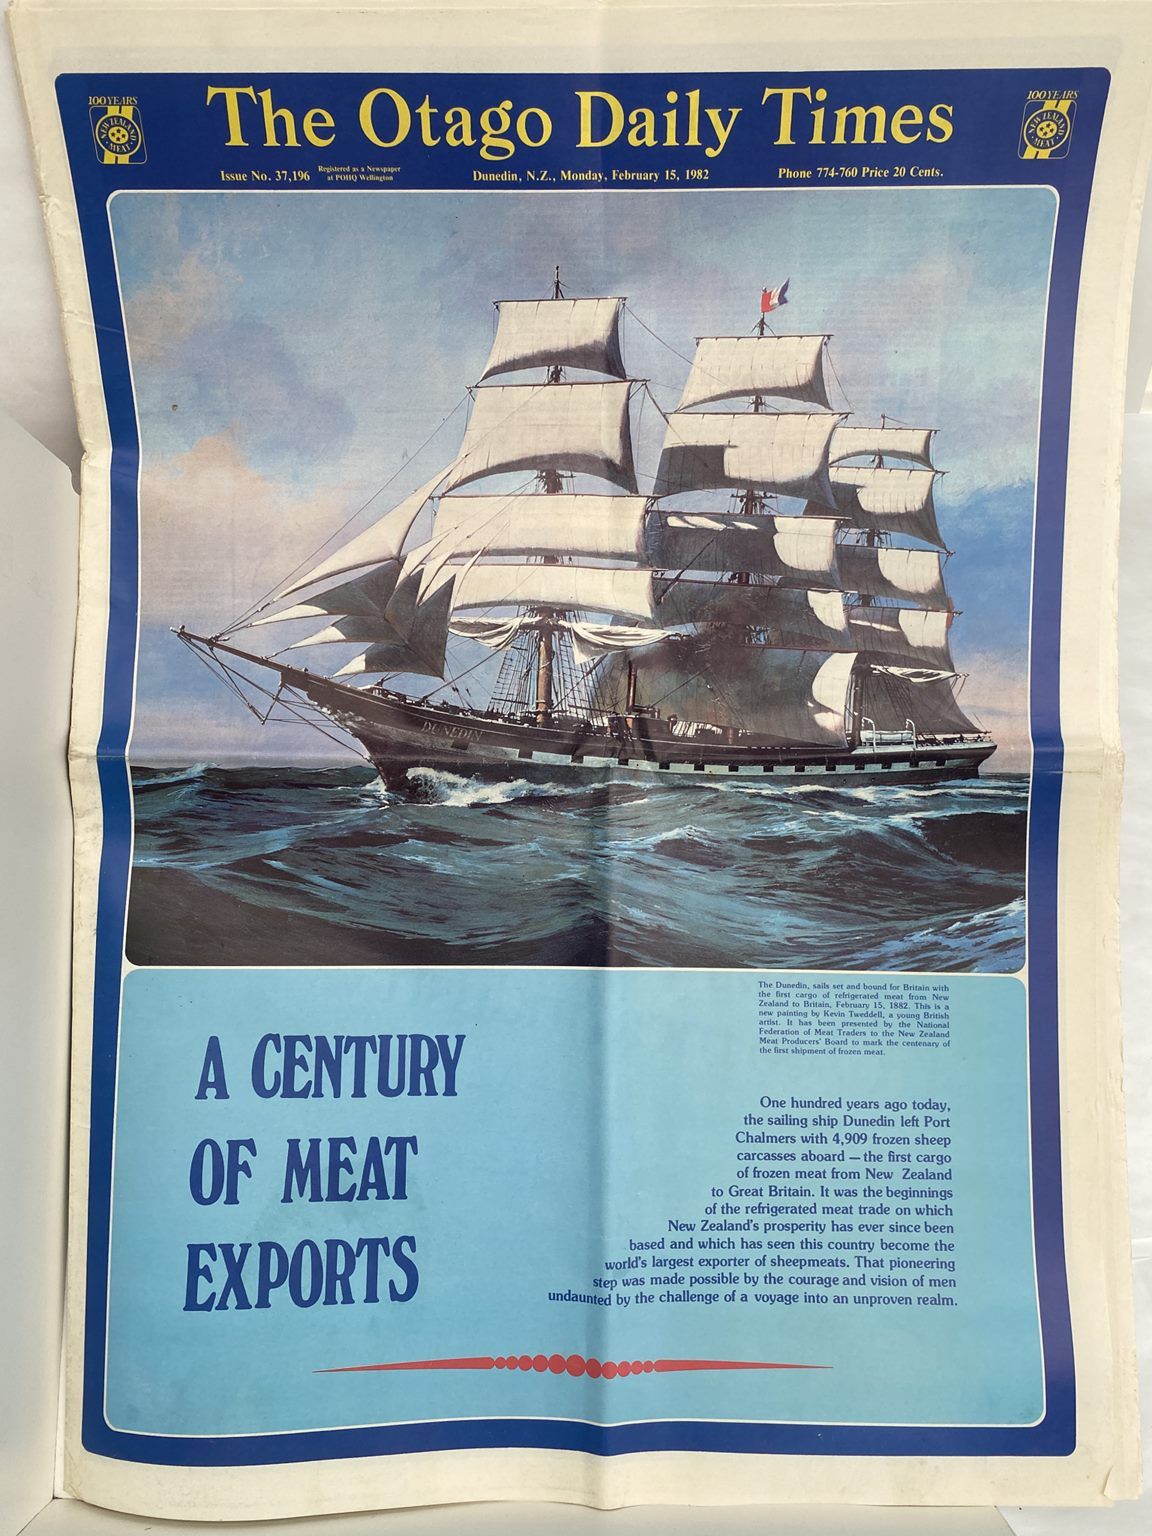 OLD NEWSPAPER: The Otago Daily Times, February 1982 - A Century of Meat Exports